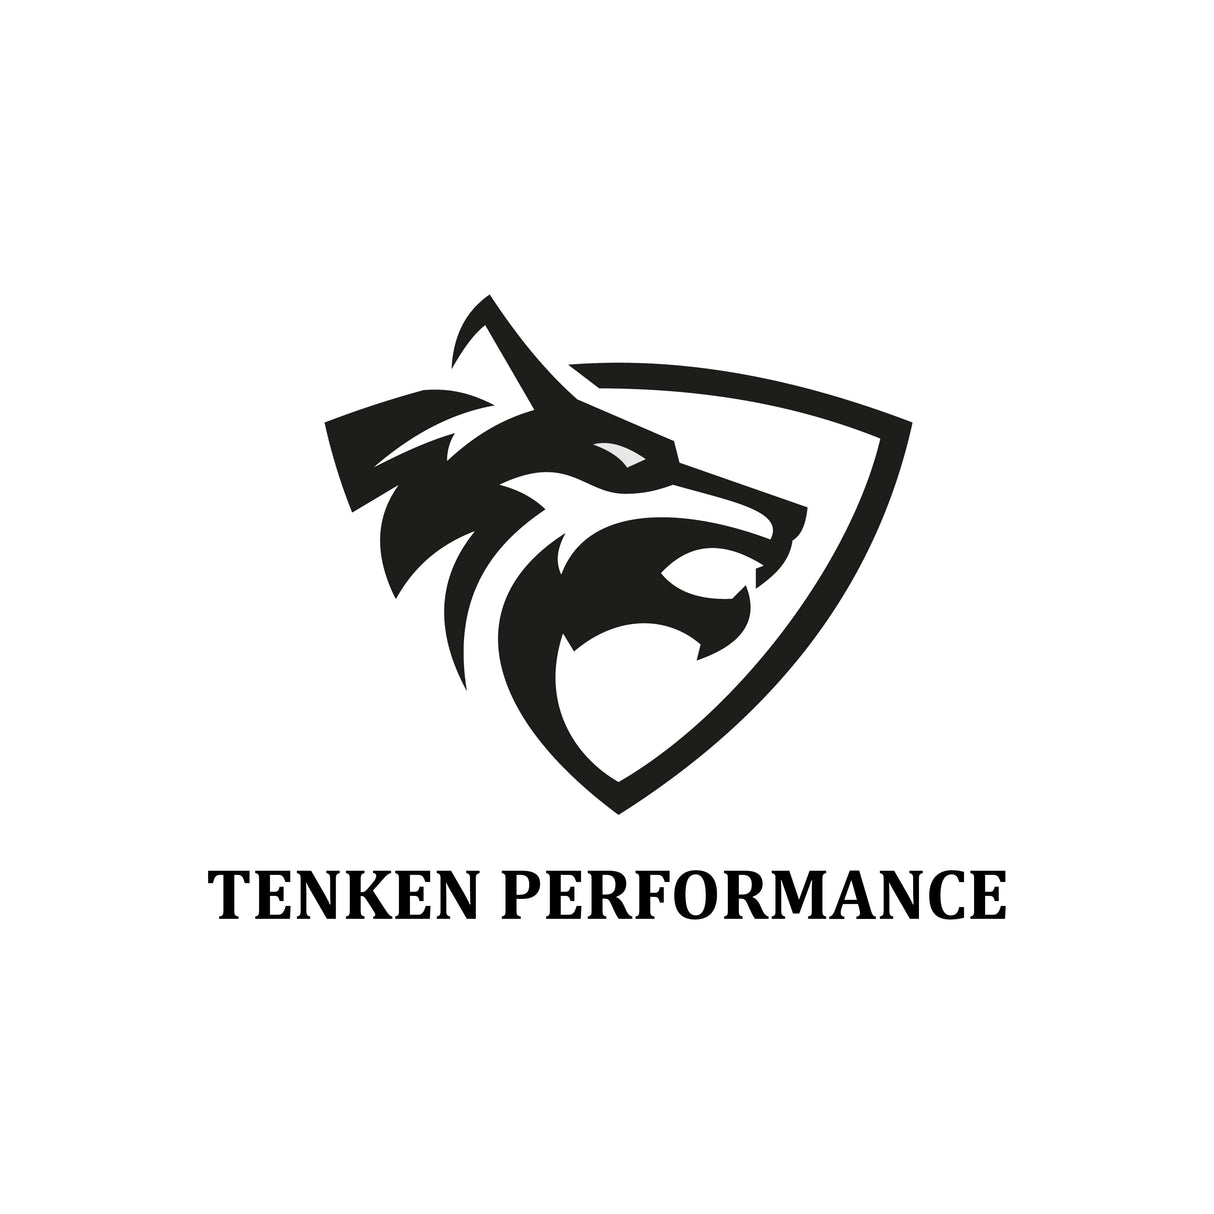 TENKEN SERVICE REQUIRED BEFORE SHIPPING